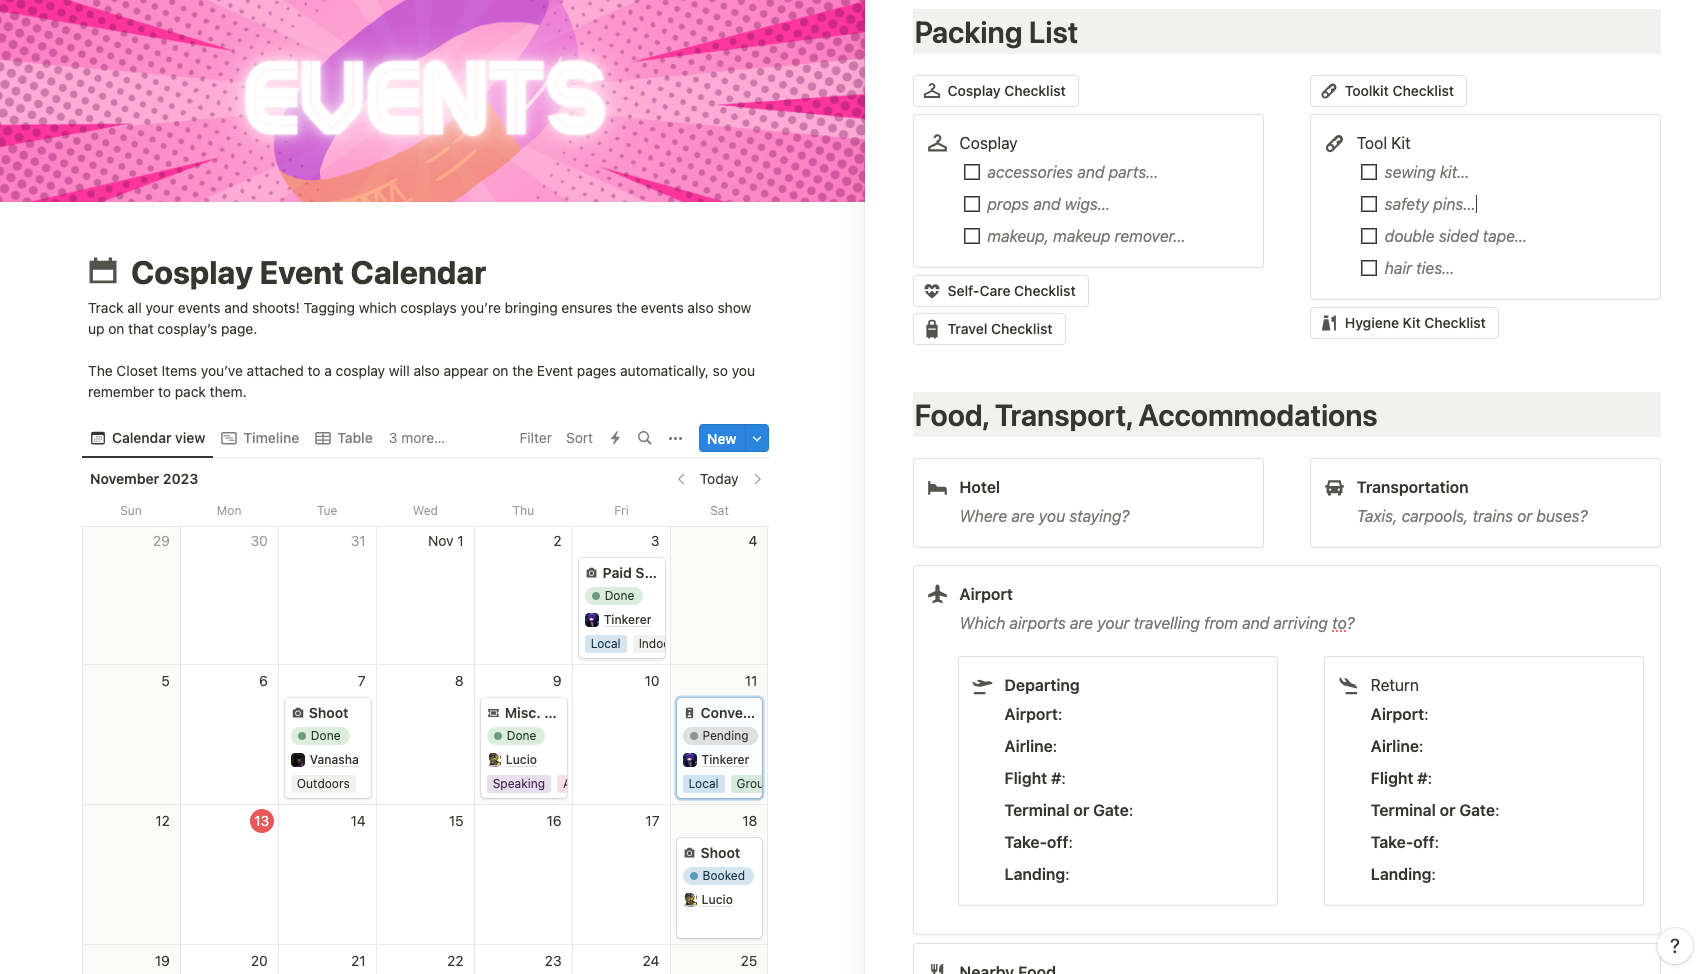 The Ultimate Cosplay Tracker is an all-in-one cosplay management tool - designed by cosplayers for cosplayers - featuring a craft management system, event calendar, resource libraries and more.